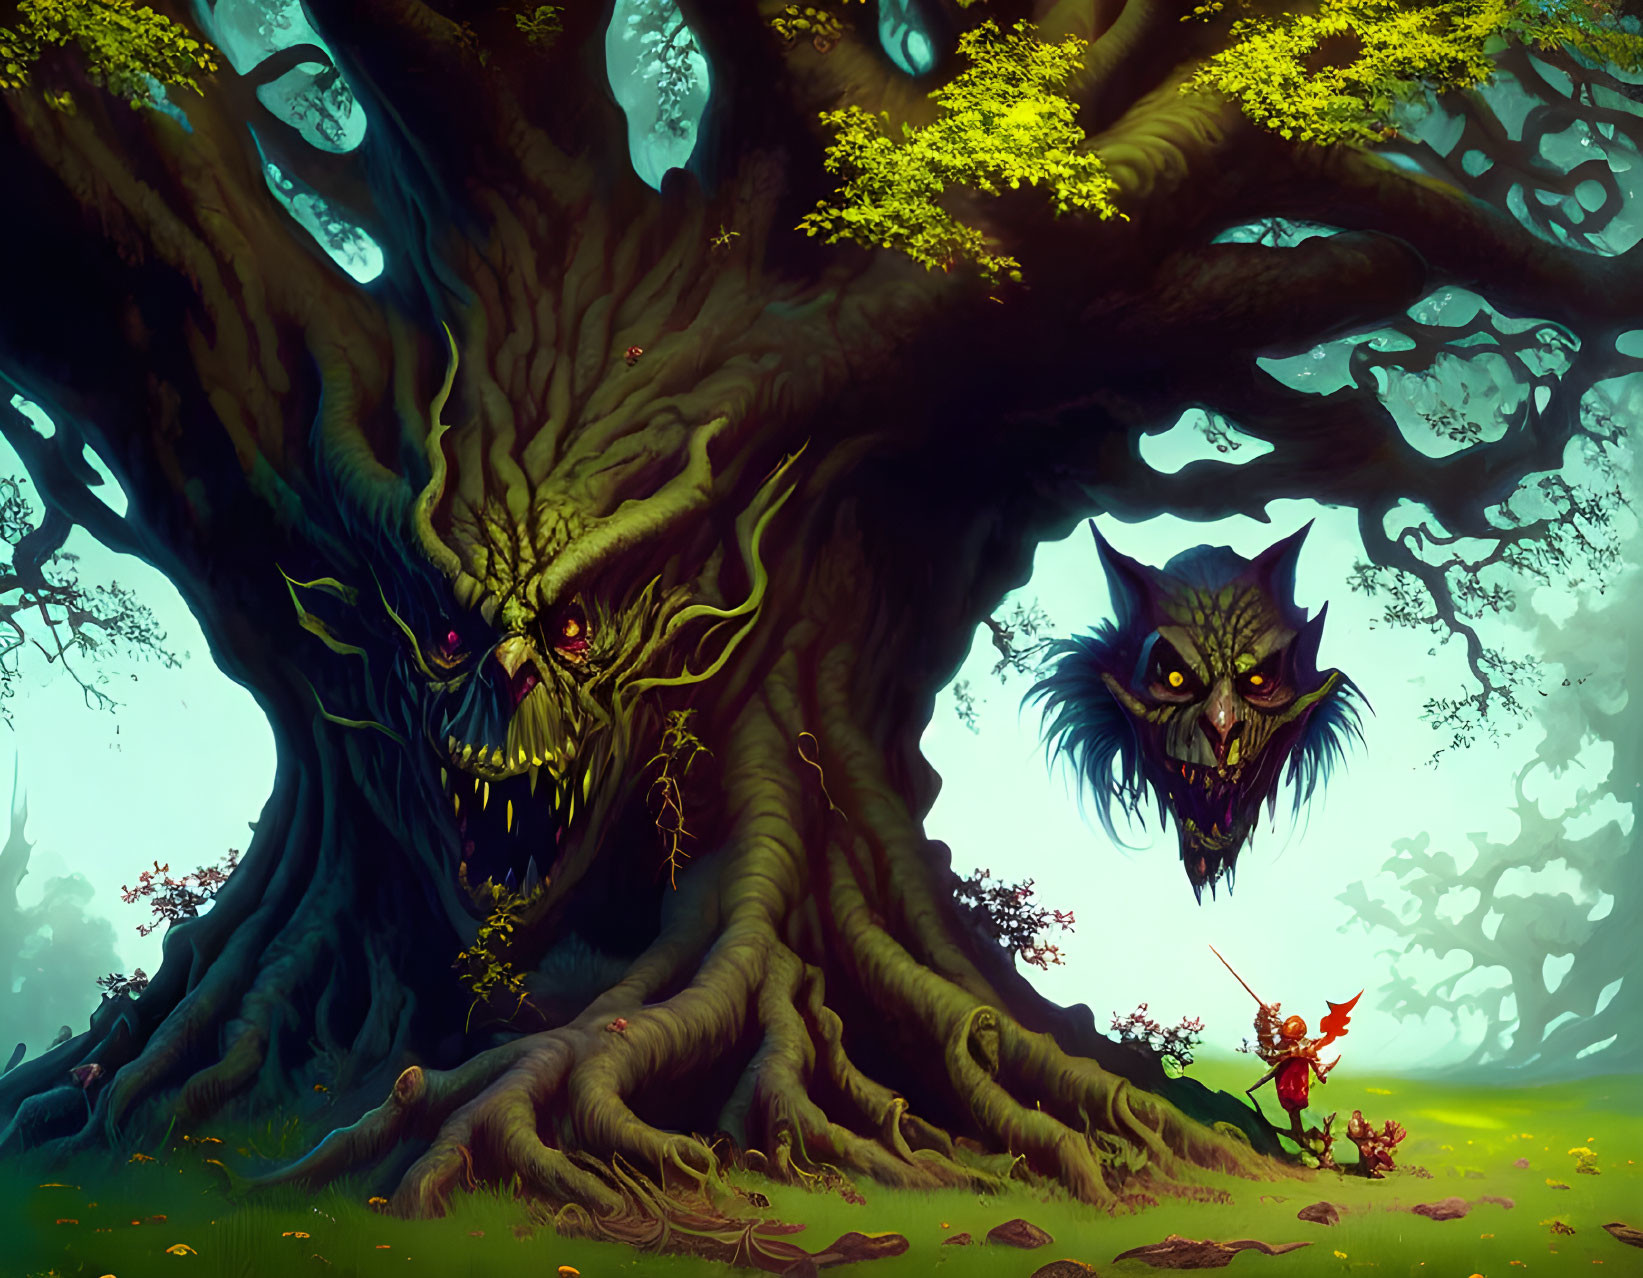 Enchanted forest with giant tree face, floating spirit, and red creature